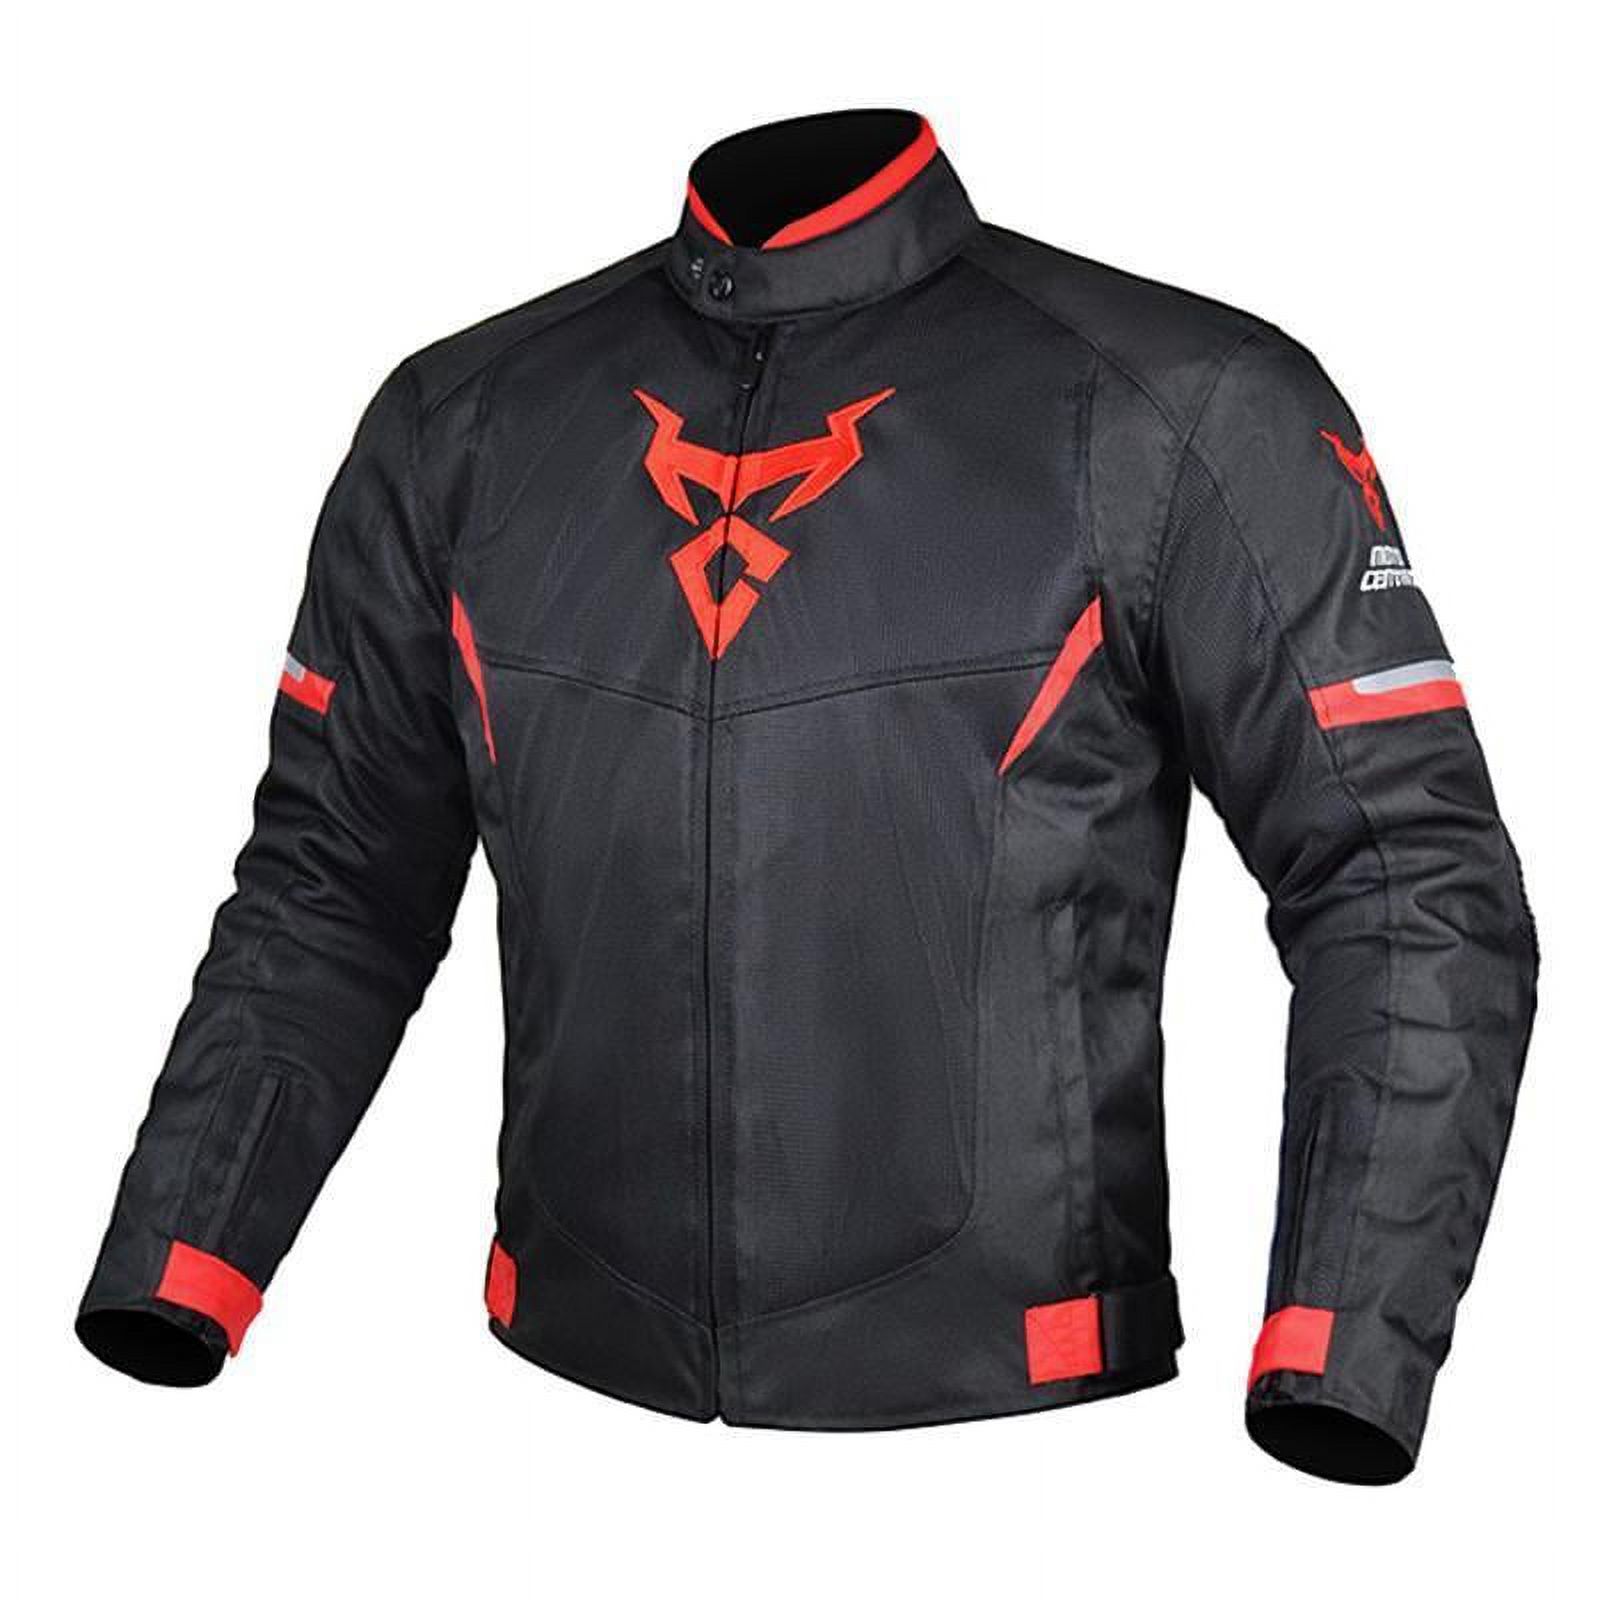 Motorcycle for Jacket Summer Mesh Breathable Racing Anti-drop for Jacket Riding - image 1 of 19